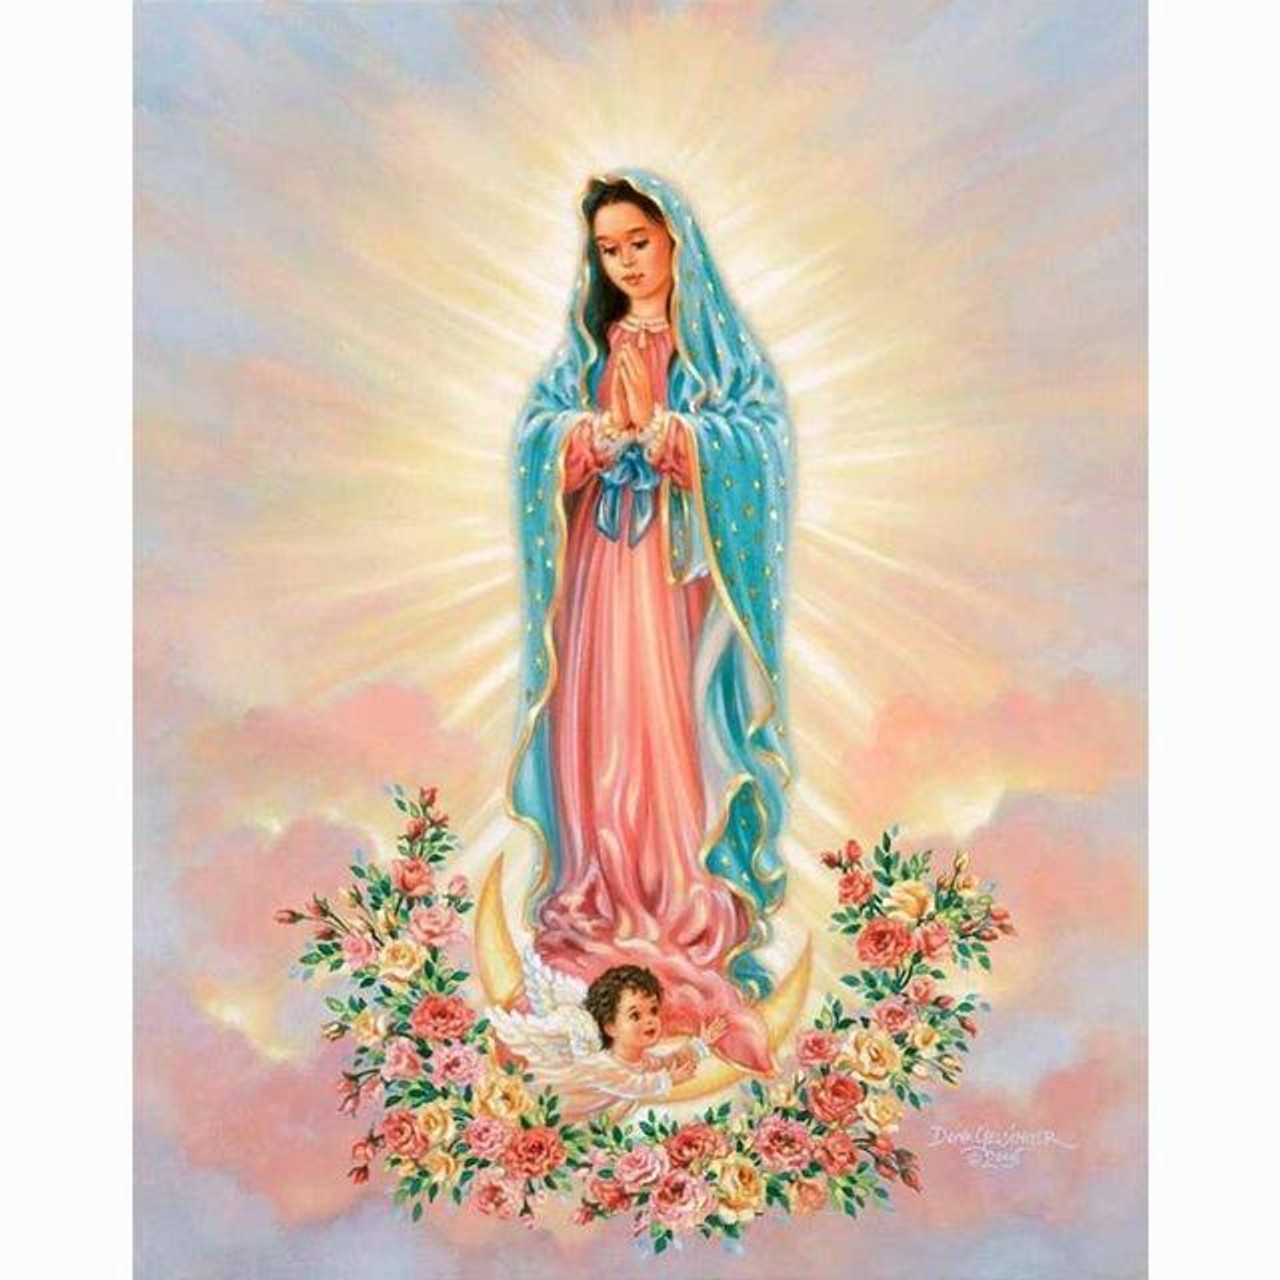 5D Diamond Painting Mother Mary Religious Kit